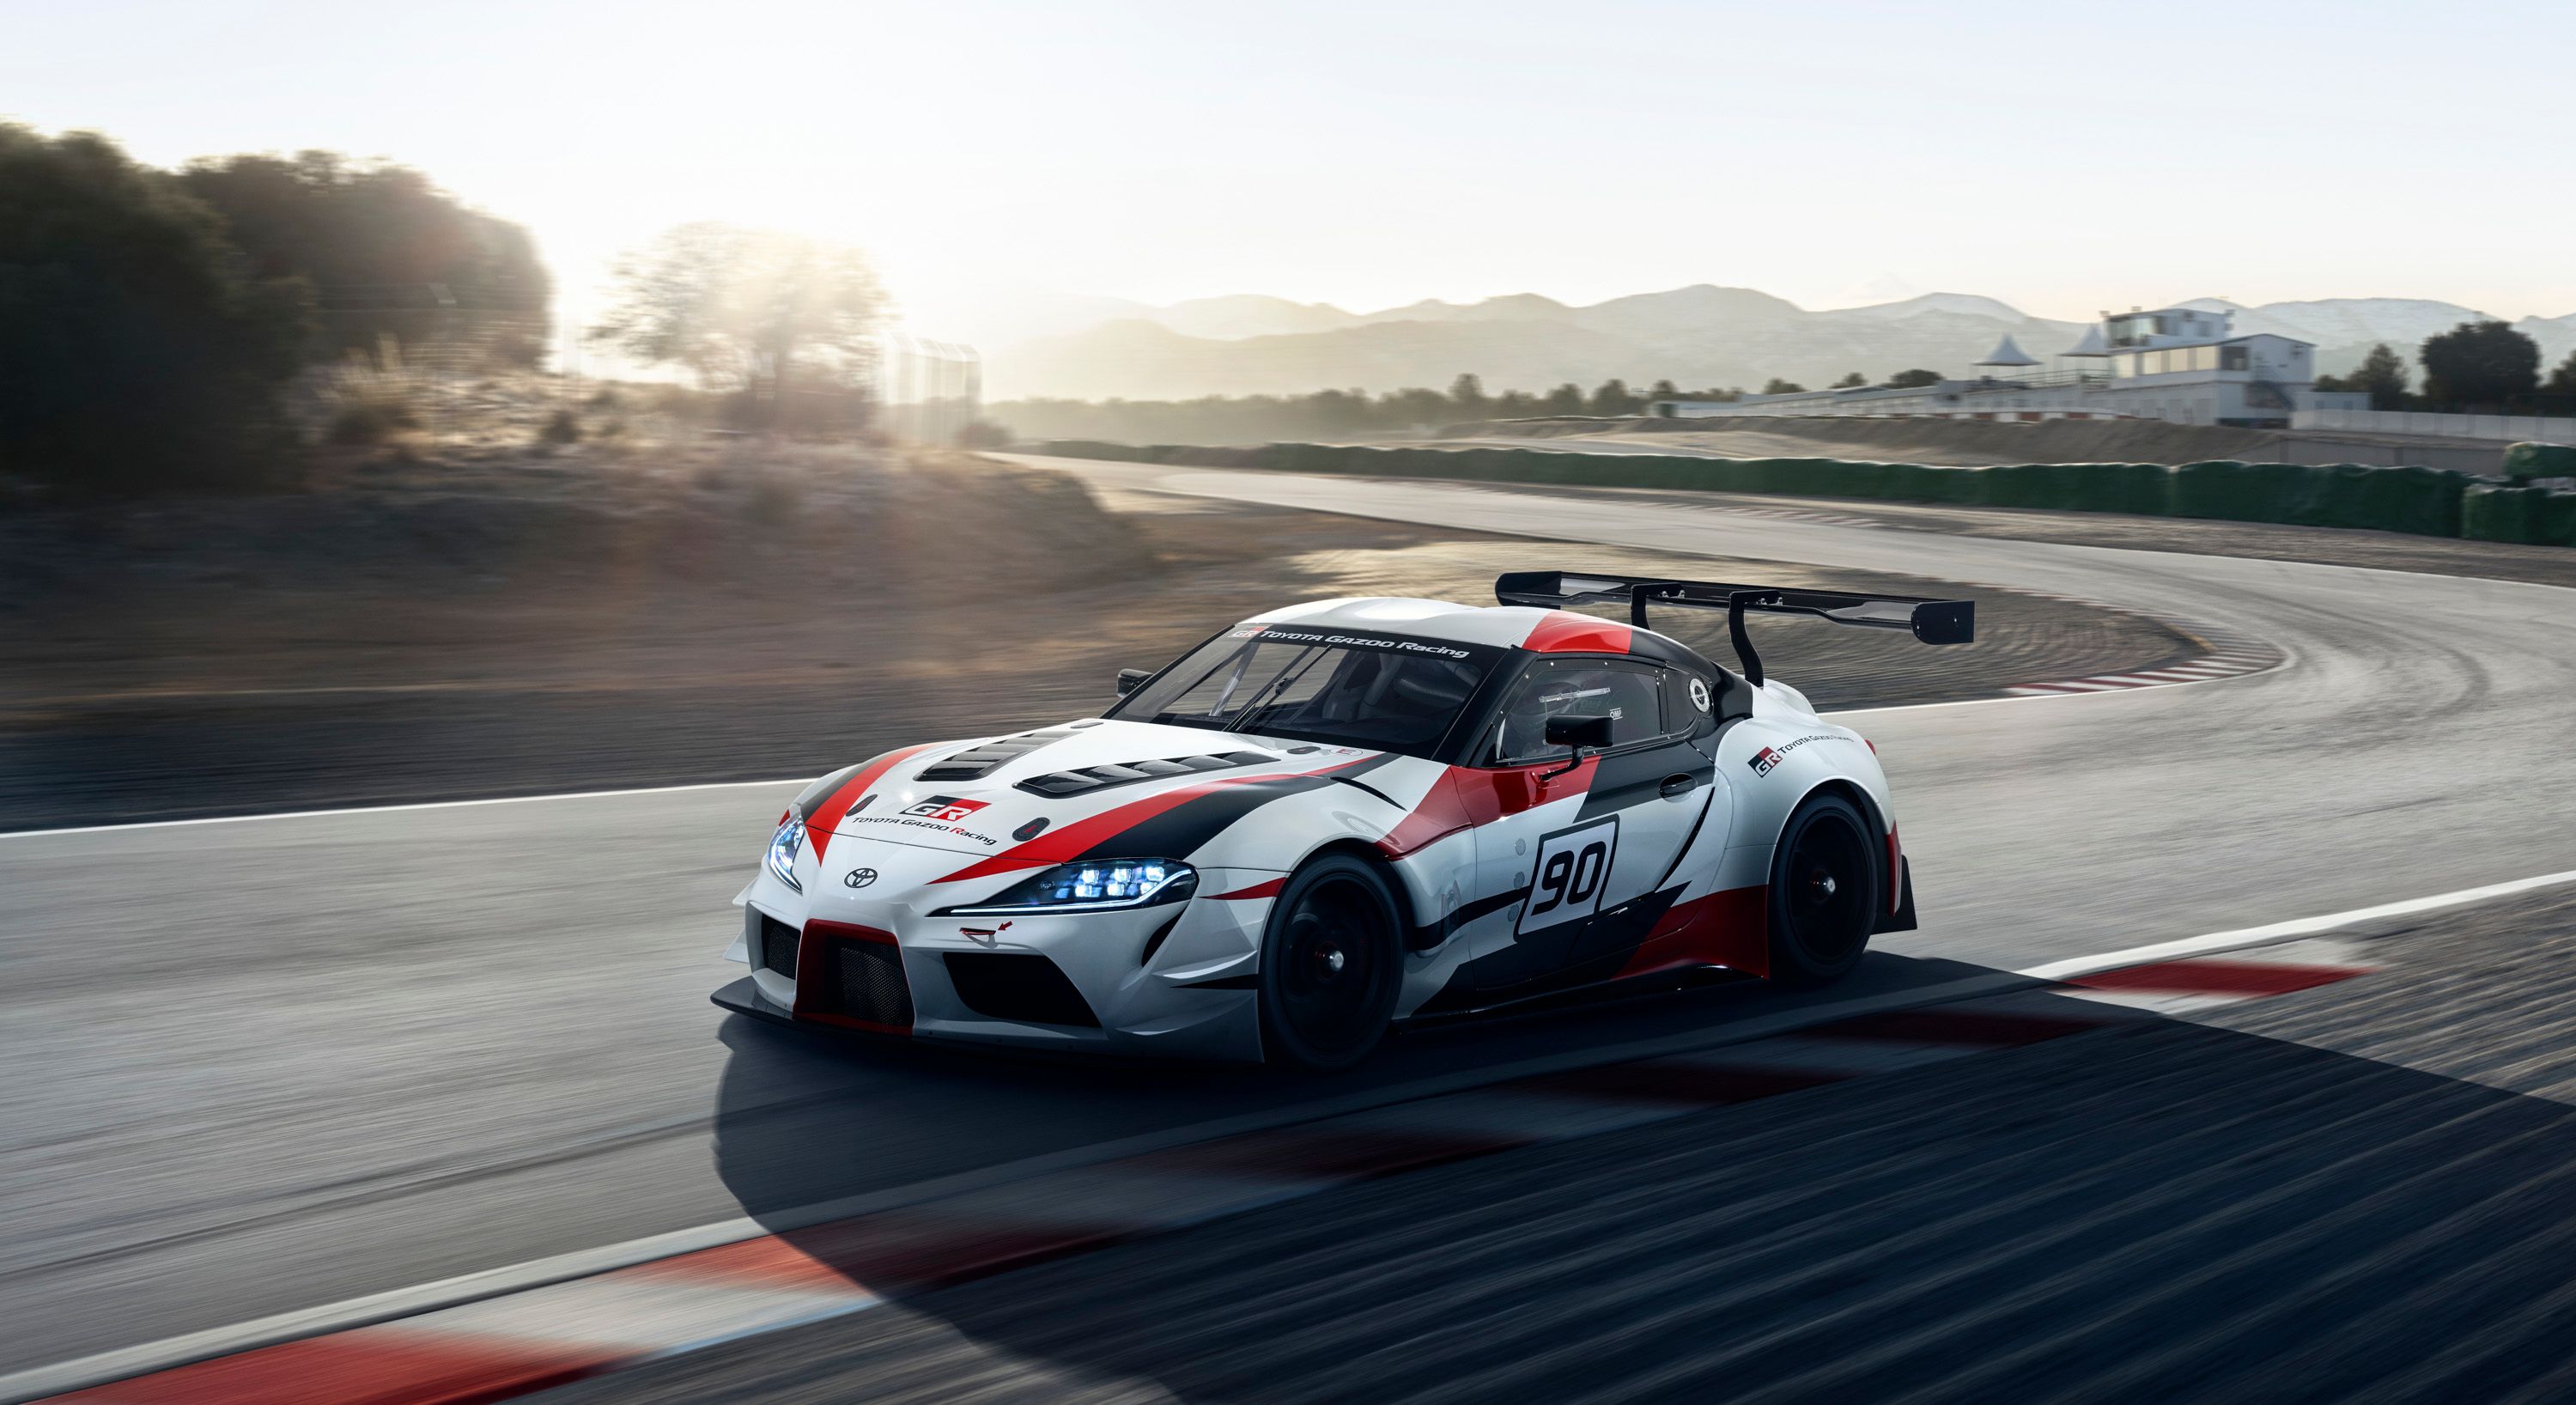 2018 Note to Toyota: Resist The Urge to Send The Toyota Supra To Race in NASCAR